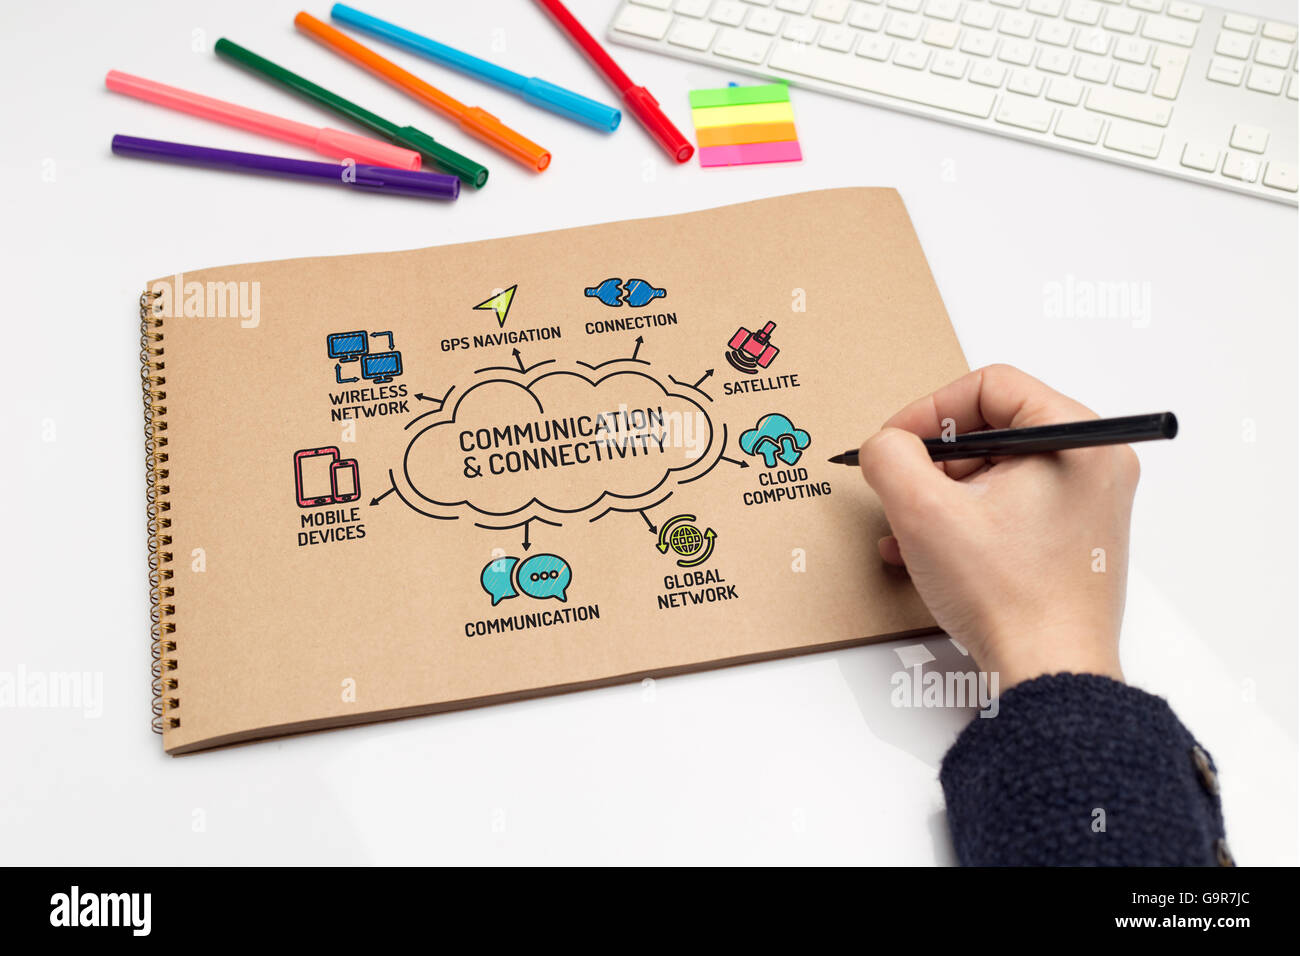 Communication and Connectivity chart with keywords and sketch icons Stock Photo